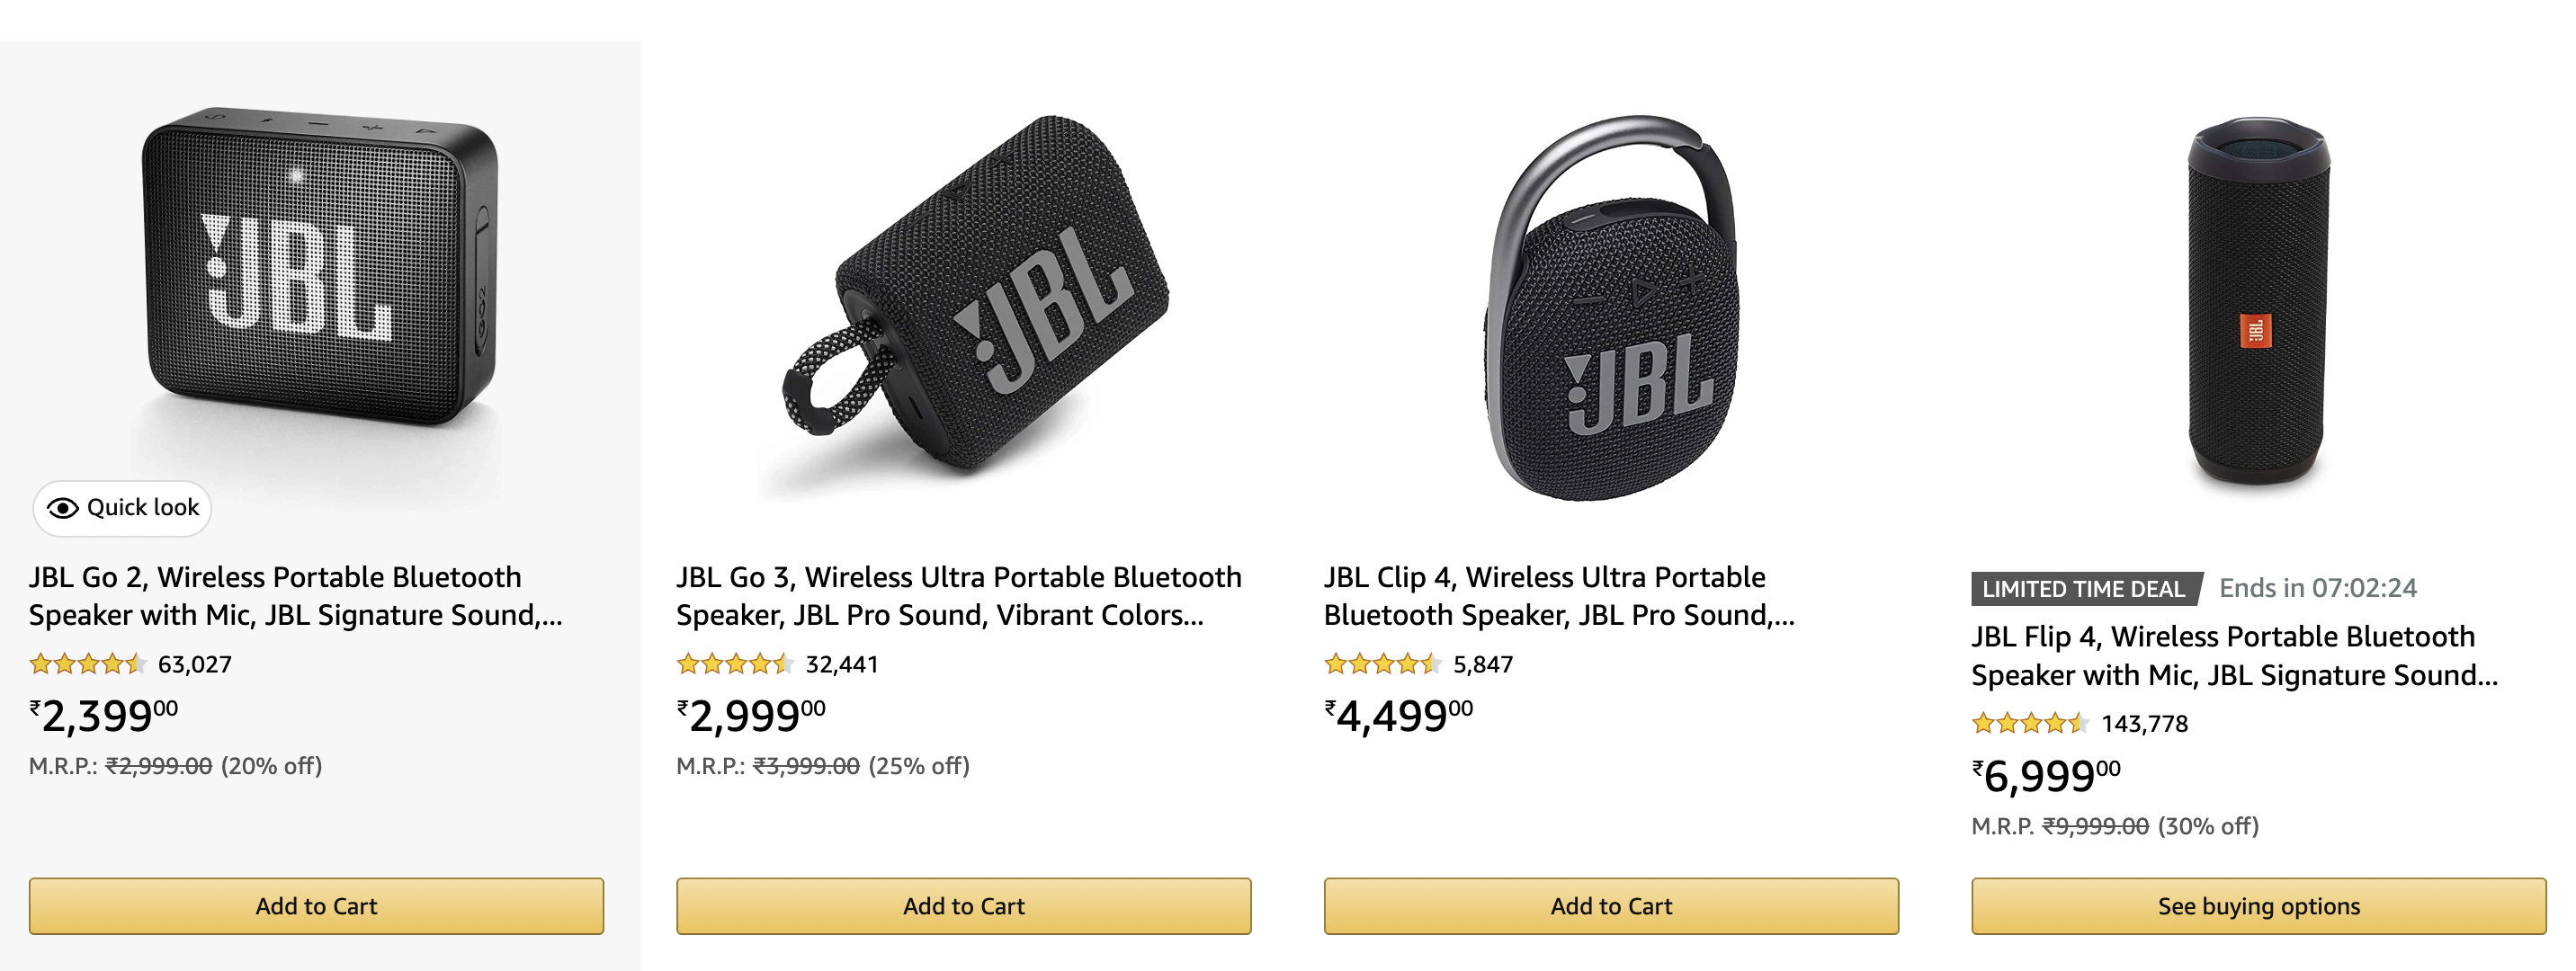 Black Friday Sale: to 50% off JBL products in Amazon Black Friday Sale - The Economic Times